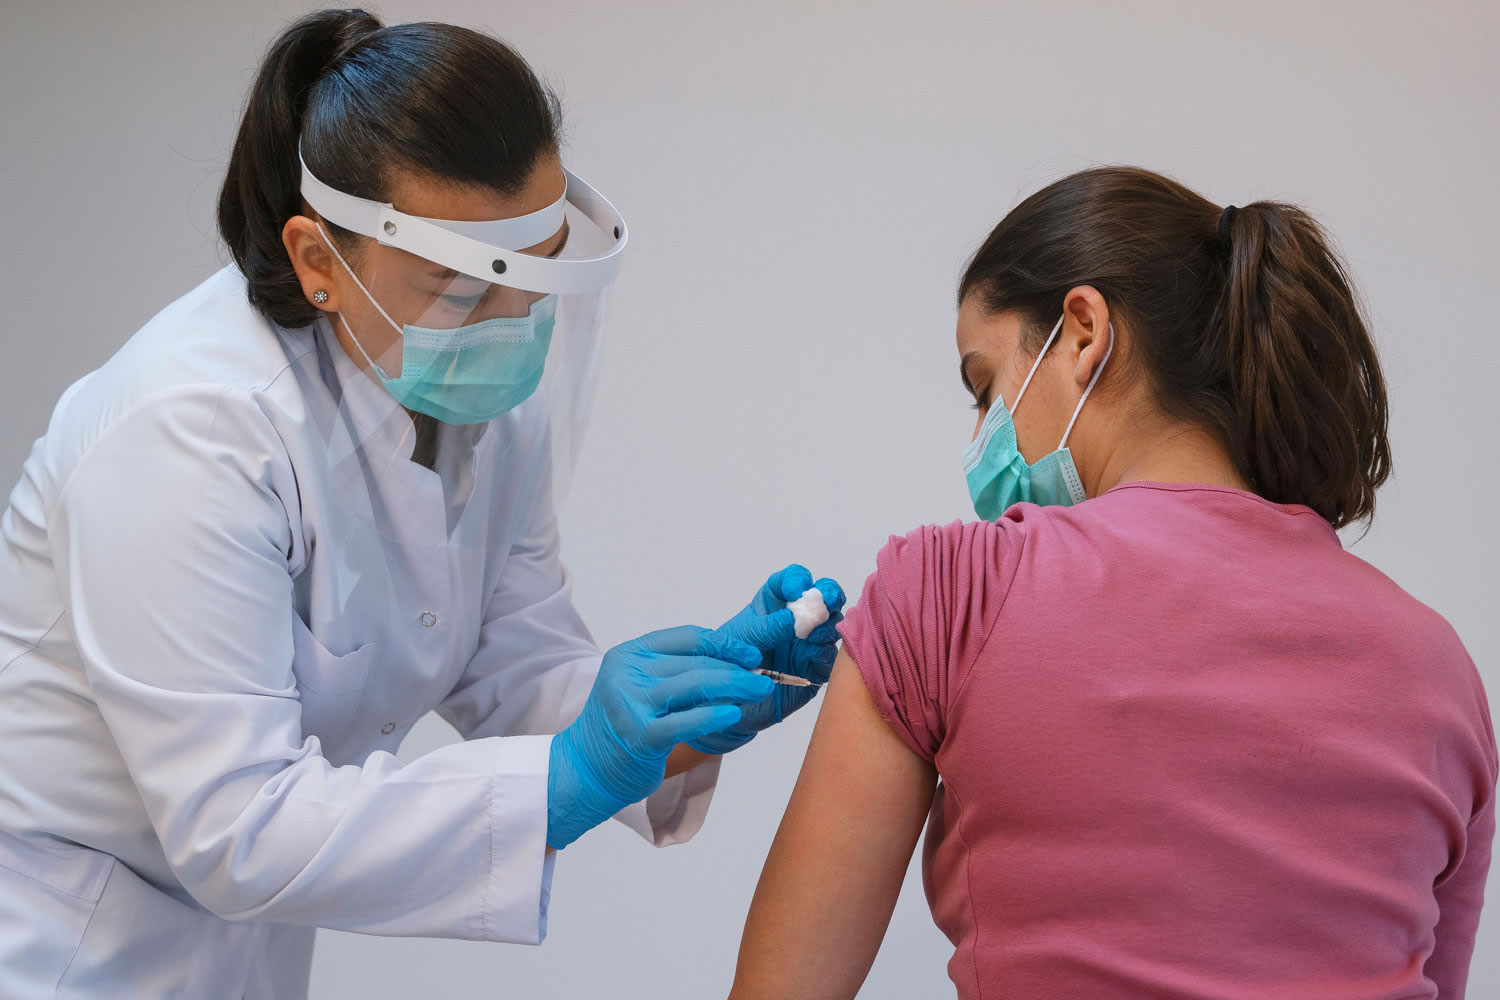 Health care worker wearing mask, face shield and gloves administers vaccine for a woman